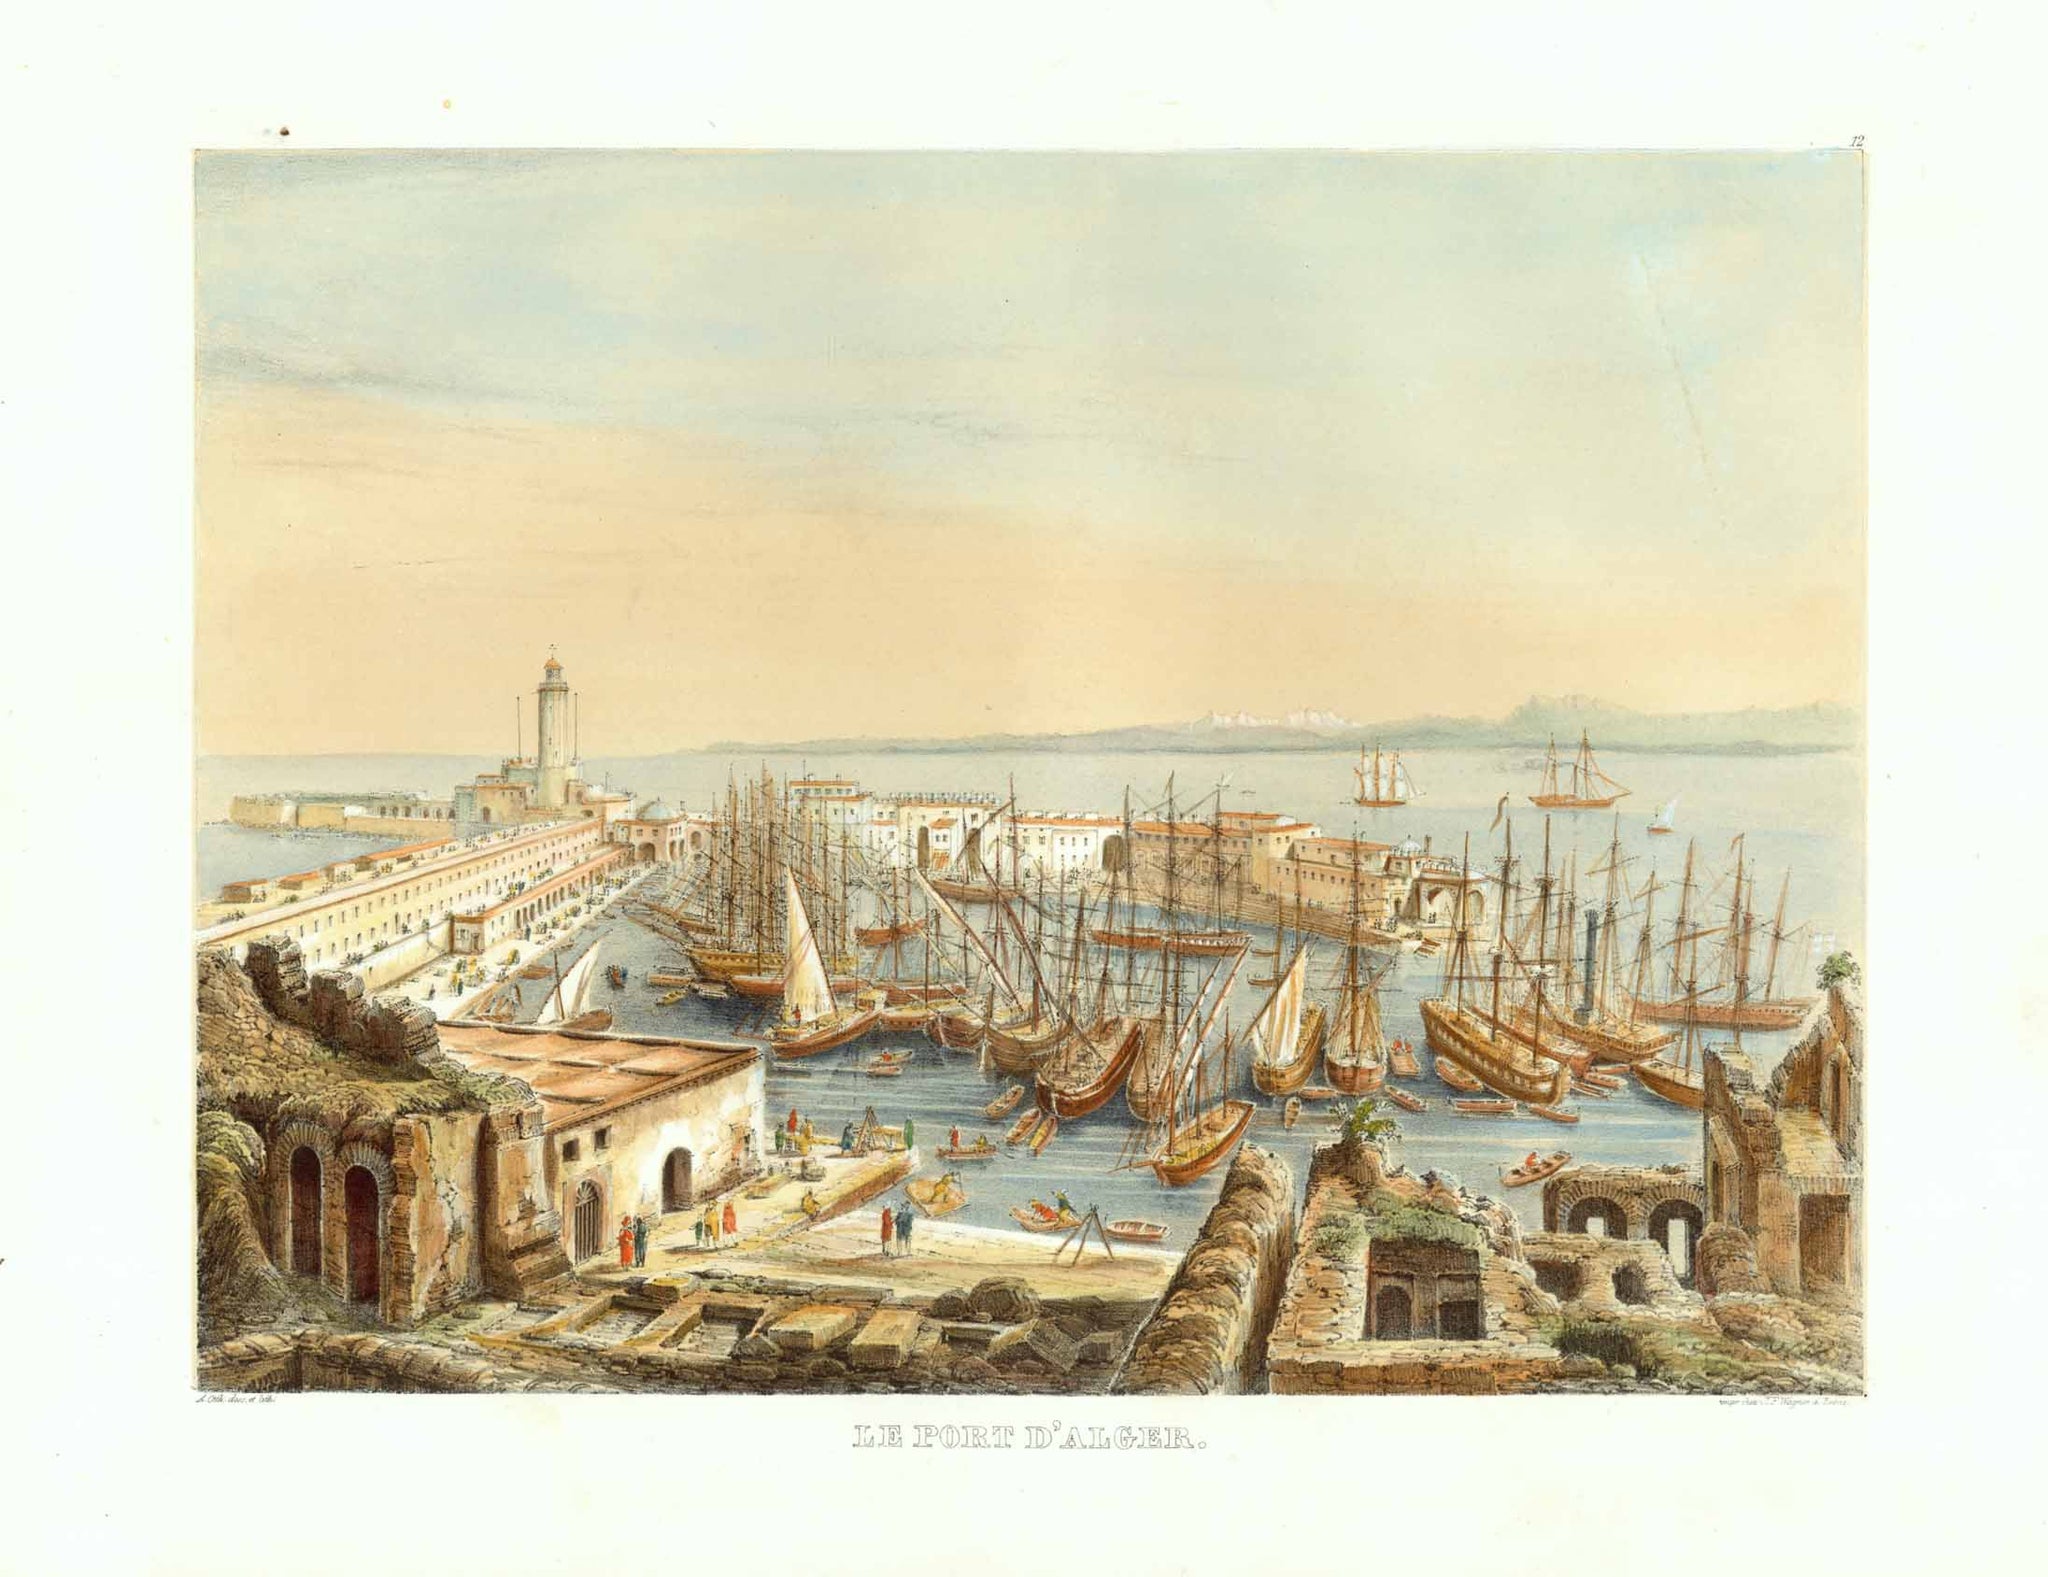 Le Port D'Alger.  View of Algeria originates from Adolphe Otth's travel observations in Algeria. He was the designer and lithographer for this astounding series which were published by J. F. Wagner at Berne, Switzerland.Ca 1850 as Esquisses africaines, dessinées pendant un voyage à Alger".  Original antique print  